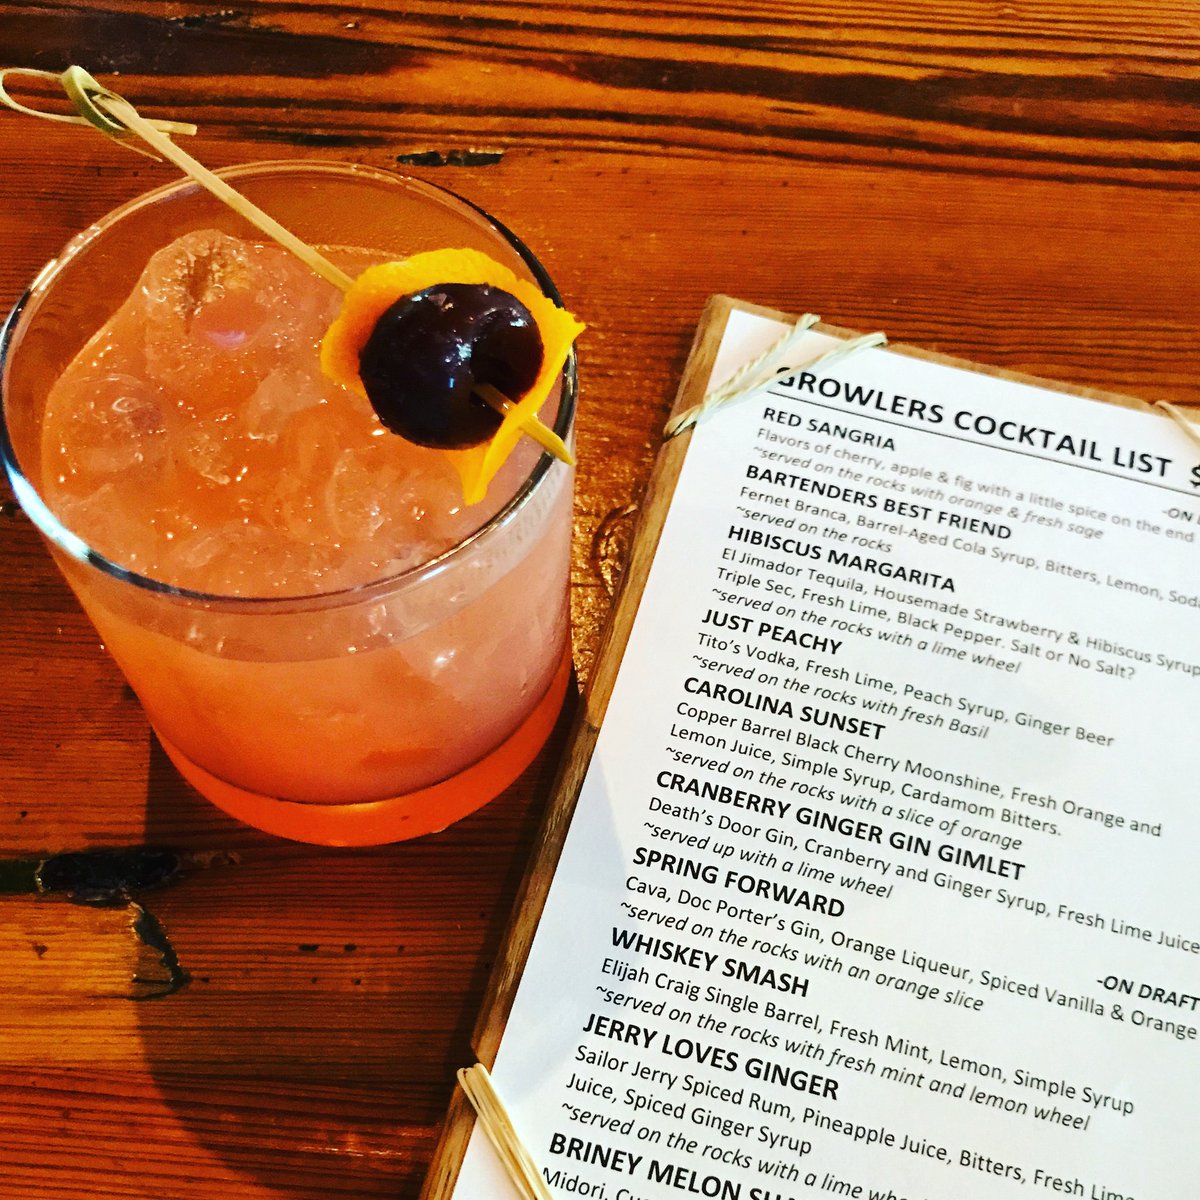 In case you haven't heard... the @charlottemag Best #Mixologist of the year winner @QCLibations has launched her latest #cocktailmenu at @growlersph. And... it includes the Carolina Sunset, a sensational #cocktail made with #WilkesCounty's finest! Thank you Colleen and Daisy!